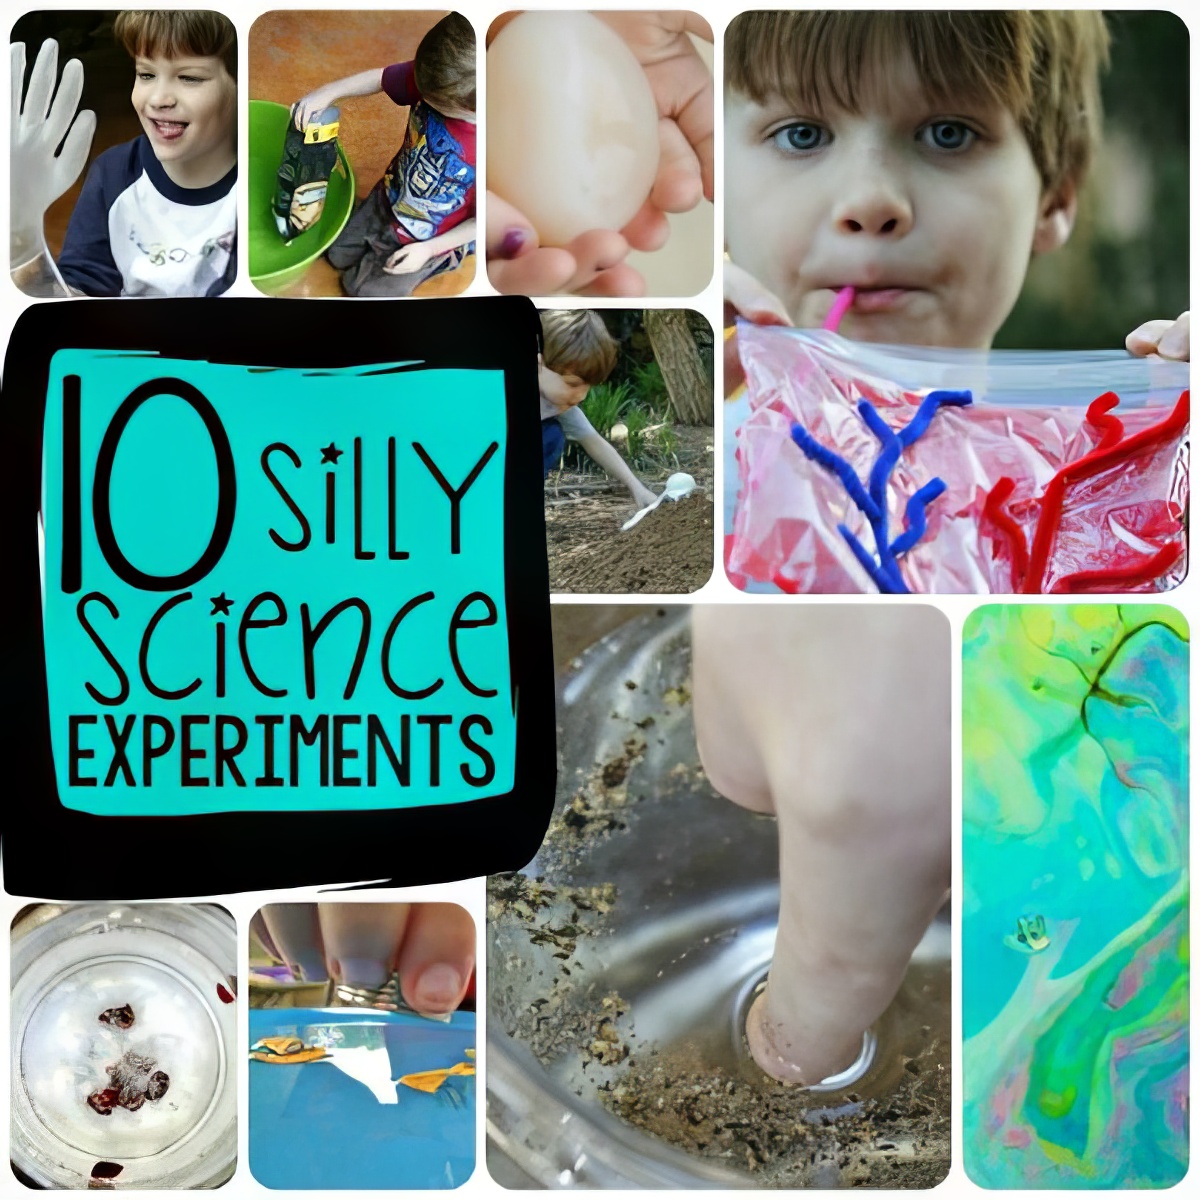 silly-science-420-text, collage of 10 silly science experiments